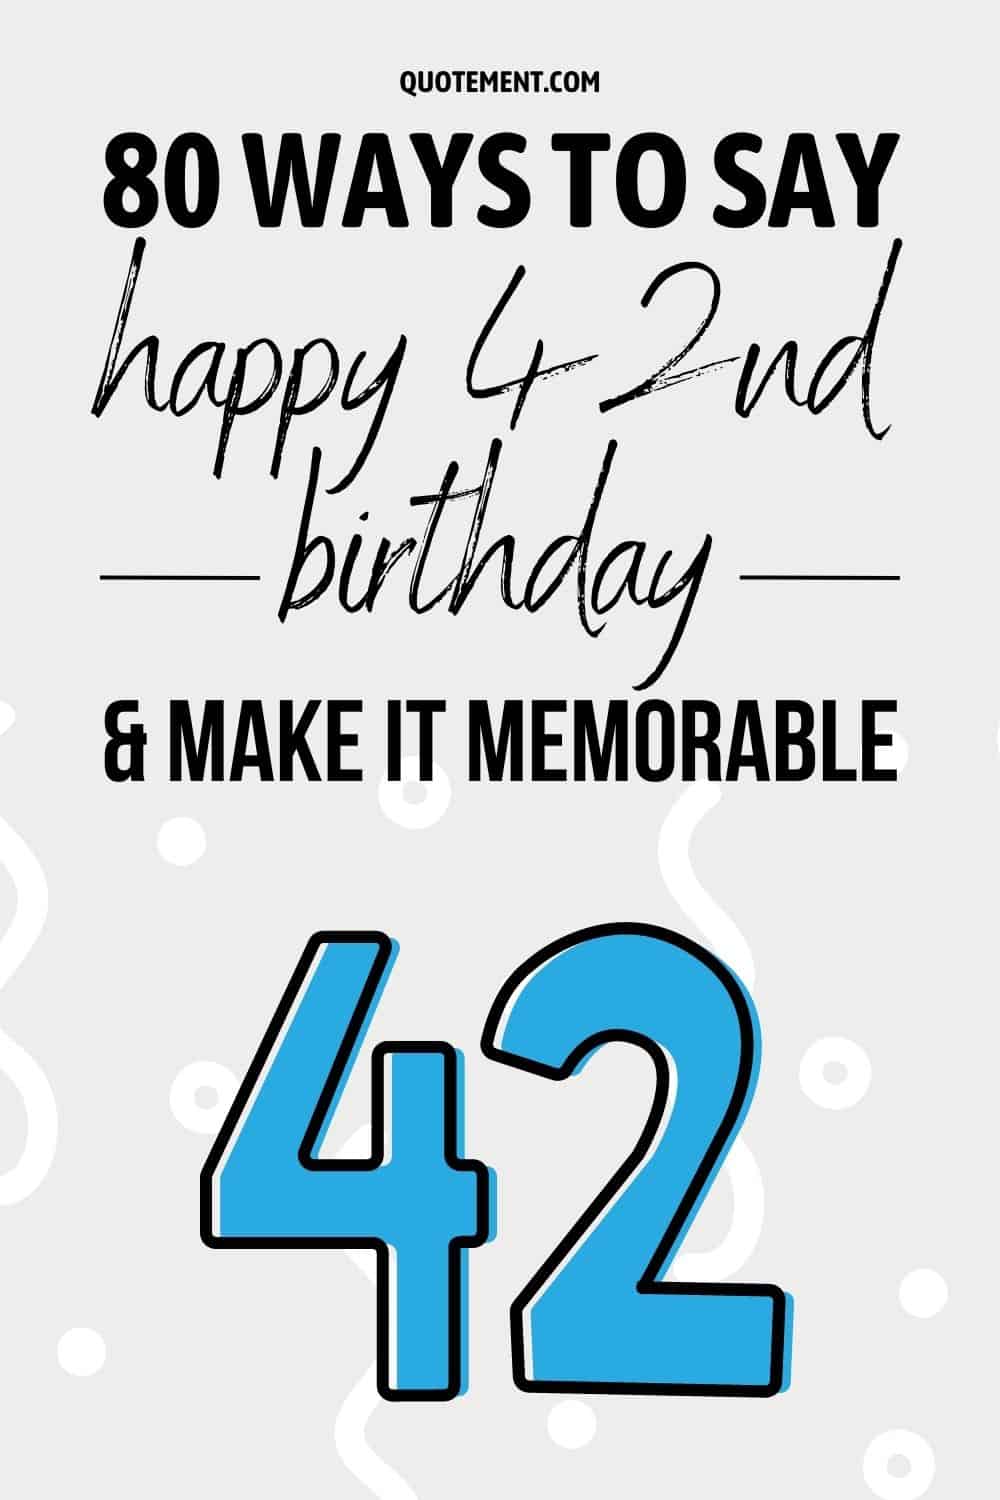 80 Ways To Say Happy 42nd Birthday And Make It Memorable
